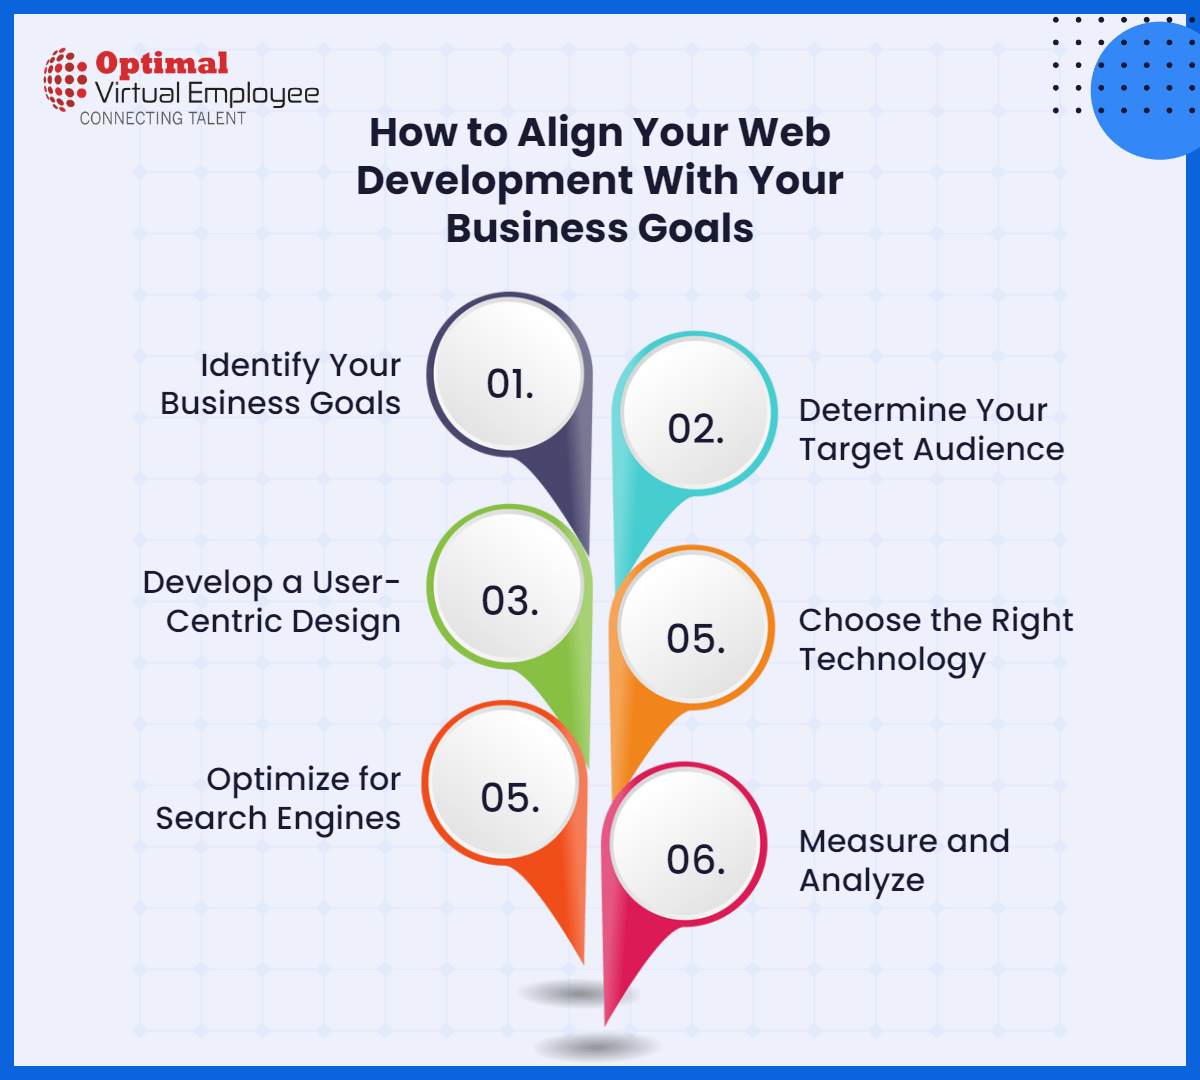 How to Align Your Web Development With Your Business Goals